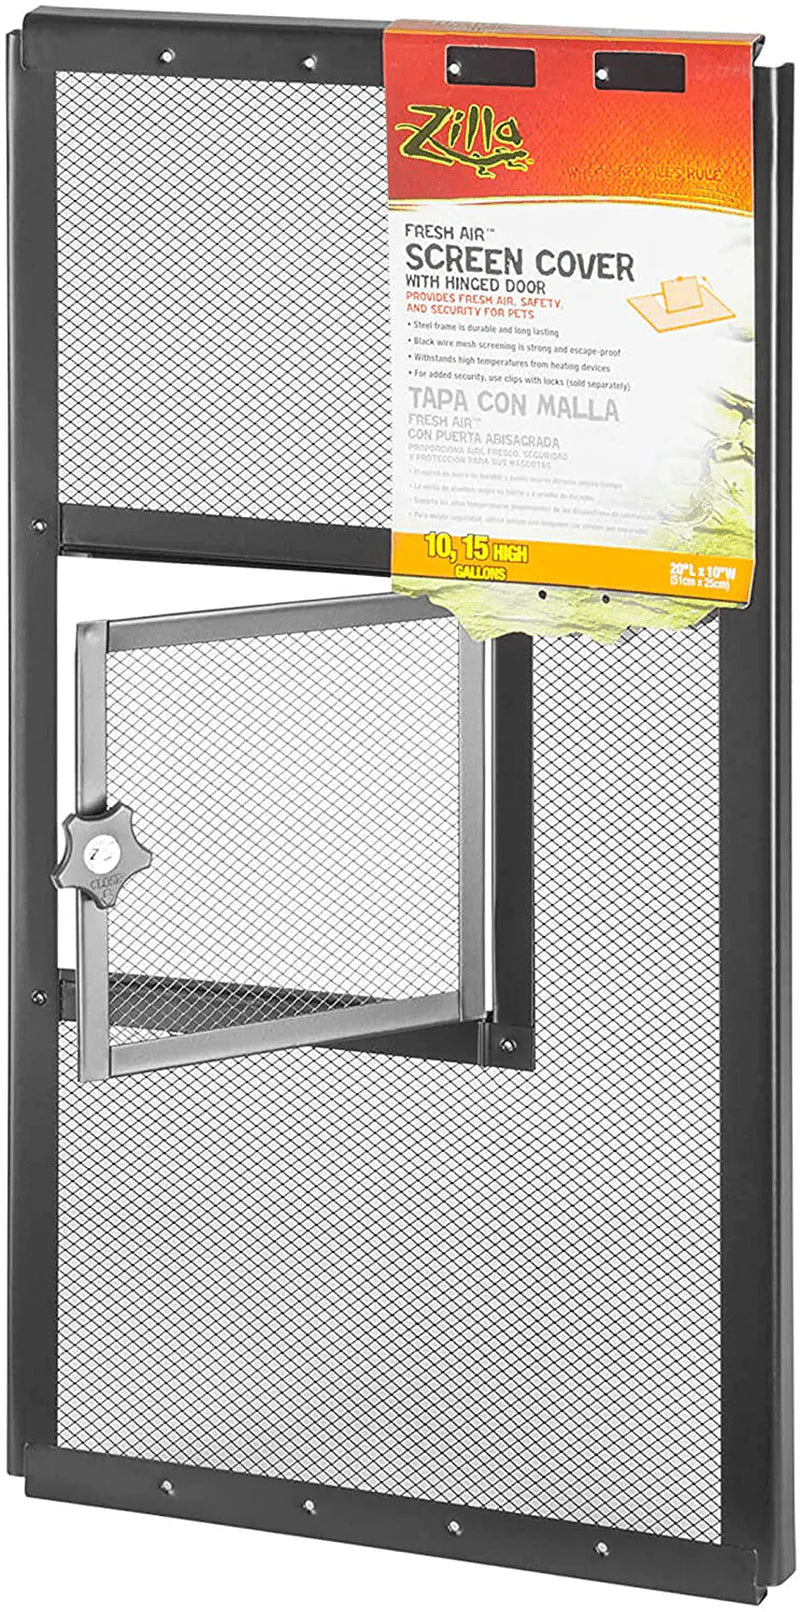 Zilla Fresh Air Screen Cover with Hinge Animals & Pet Supplies > Pet Supplies > Reptile & Amphibian Supplies > Reptile & Amphibian Habitat Accessories Zilla Standard Packaging 20x10 Inch (Pack of 1) 